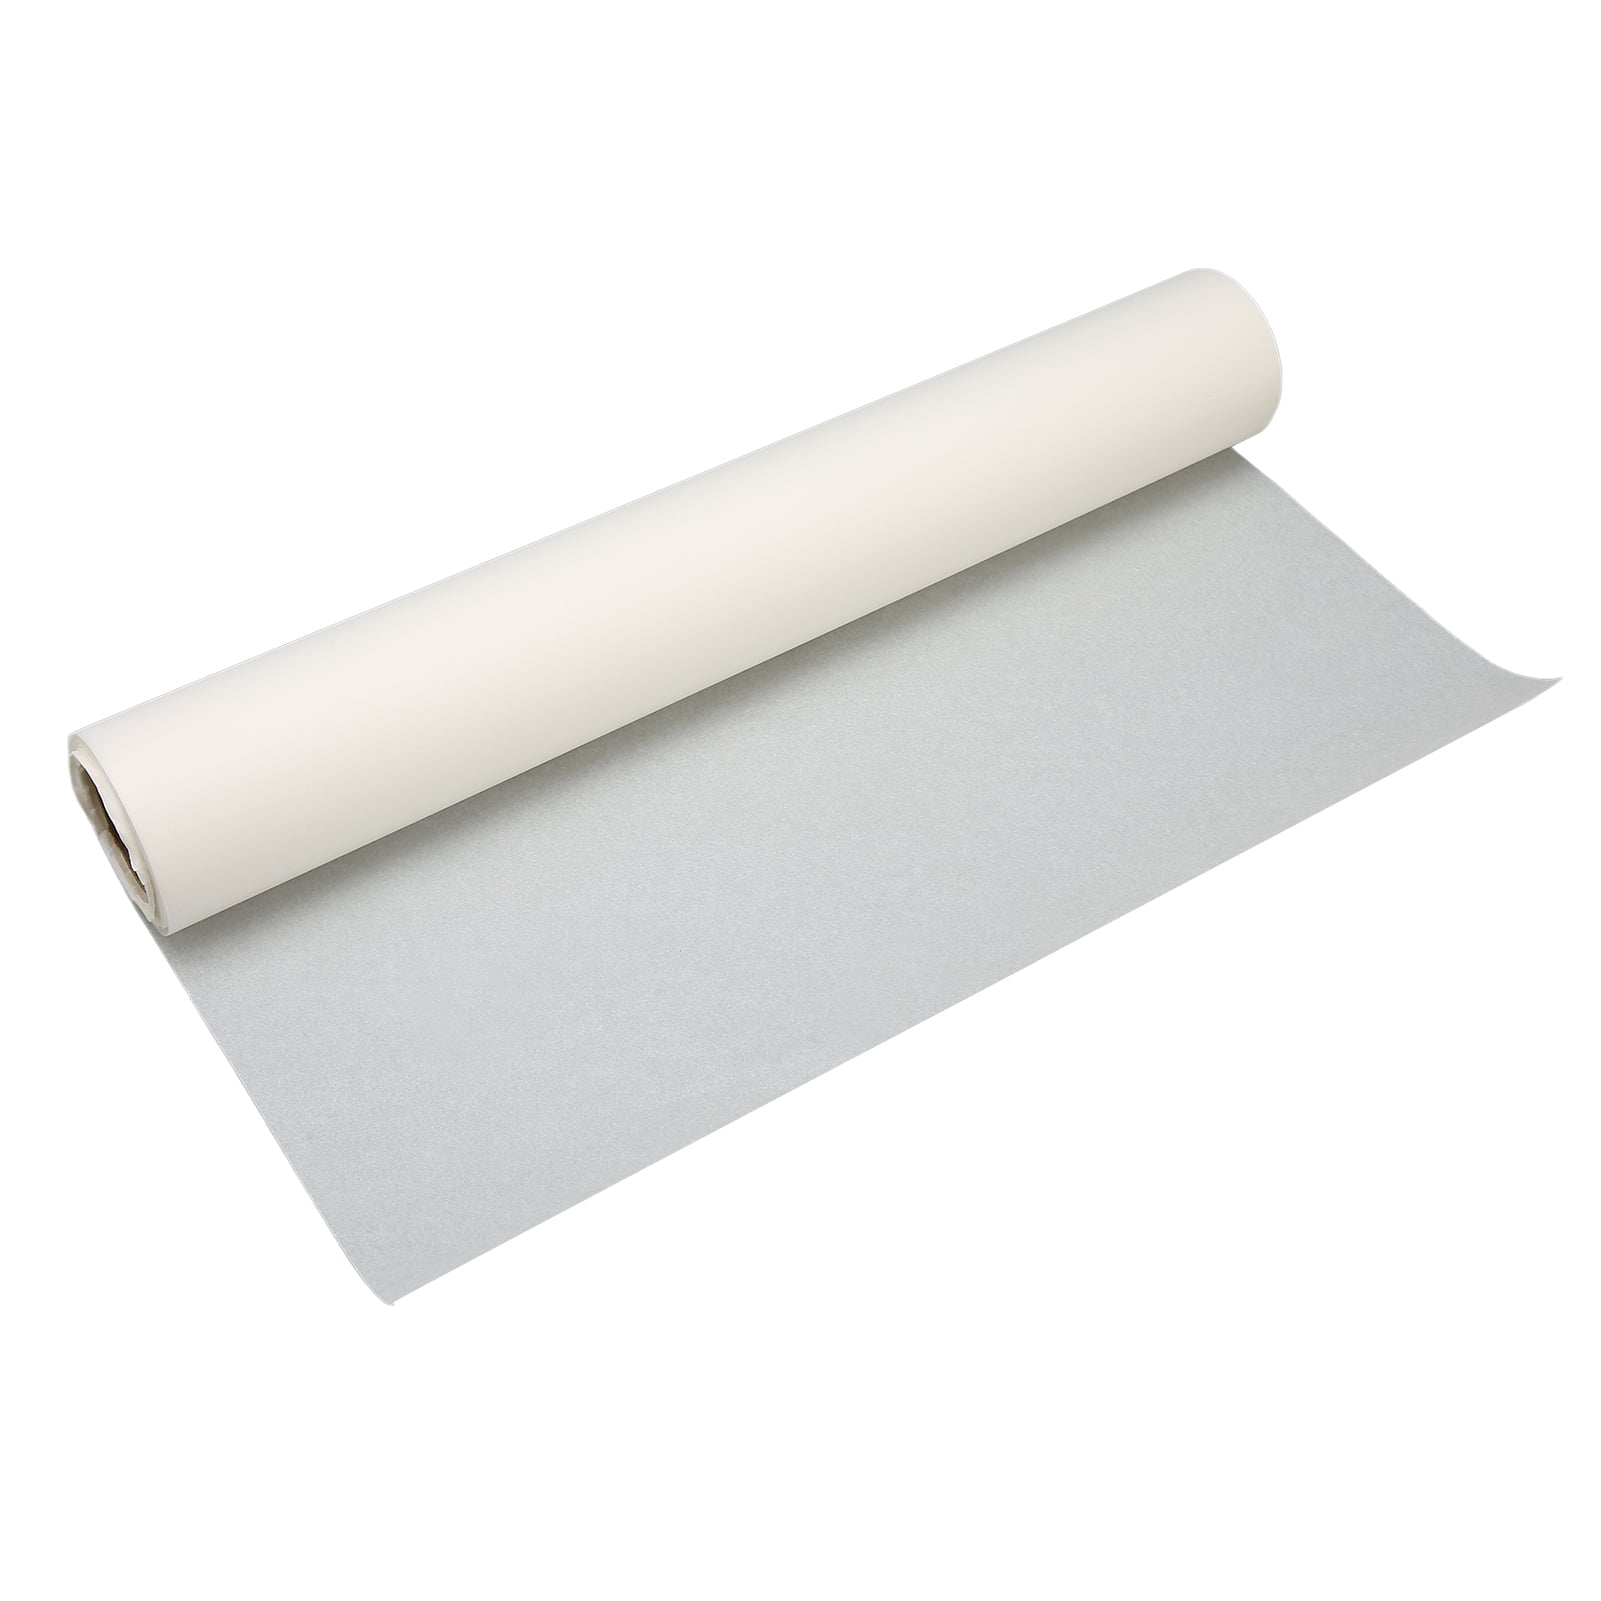 Tracing Paper Roll White Paper For Sewing Dressmaking Sketch Drafting(2)